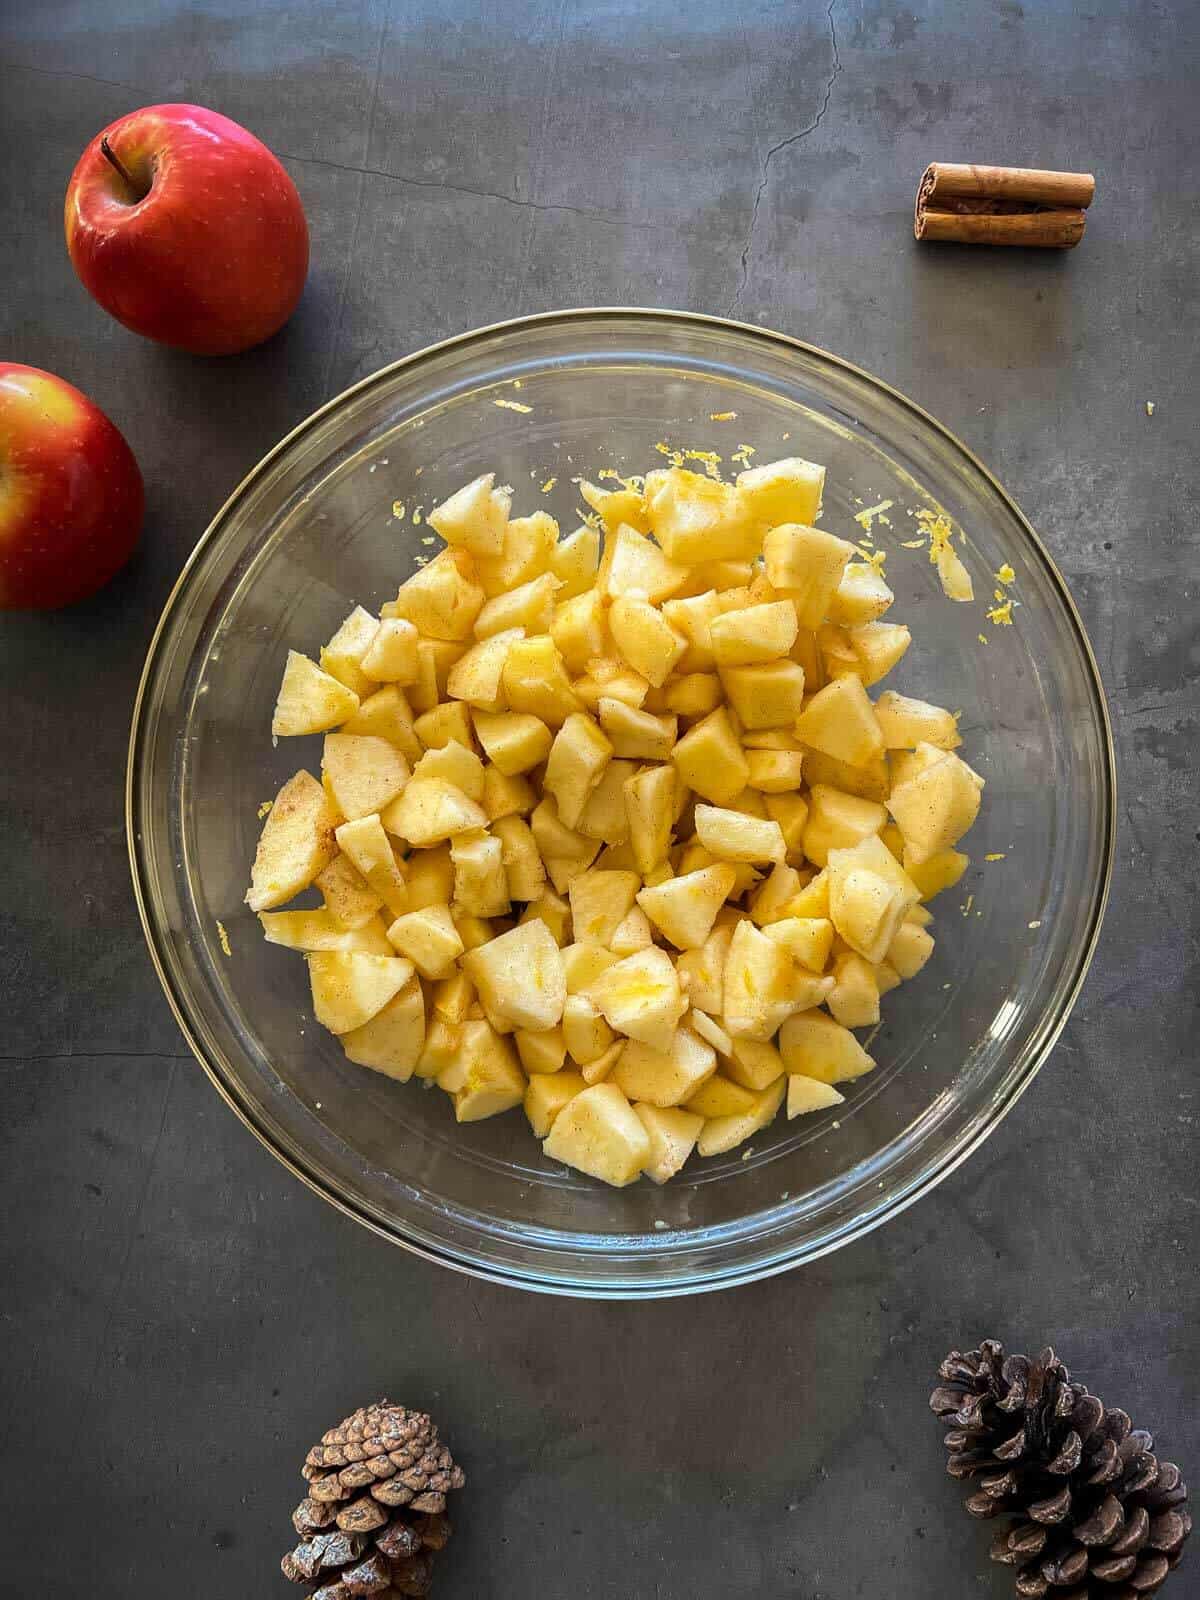 chopped apples with lemon and cinnamon